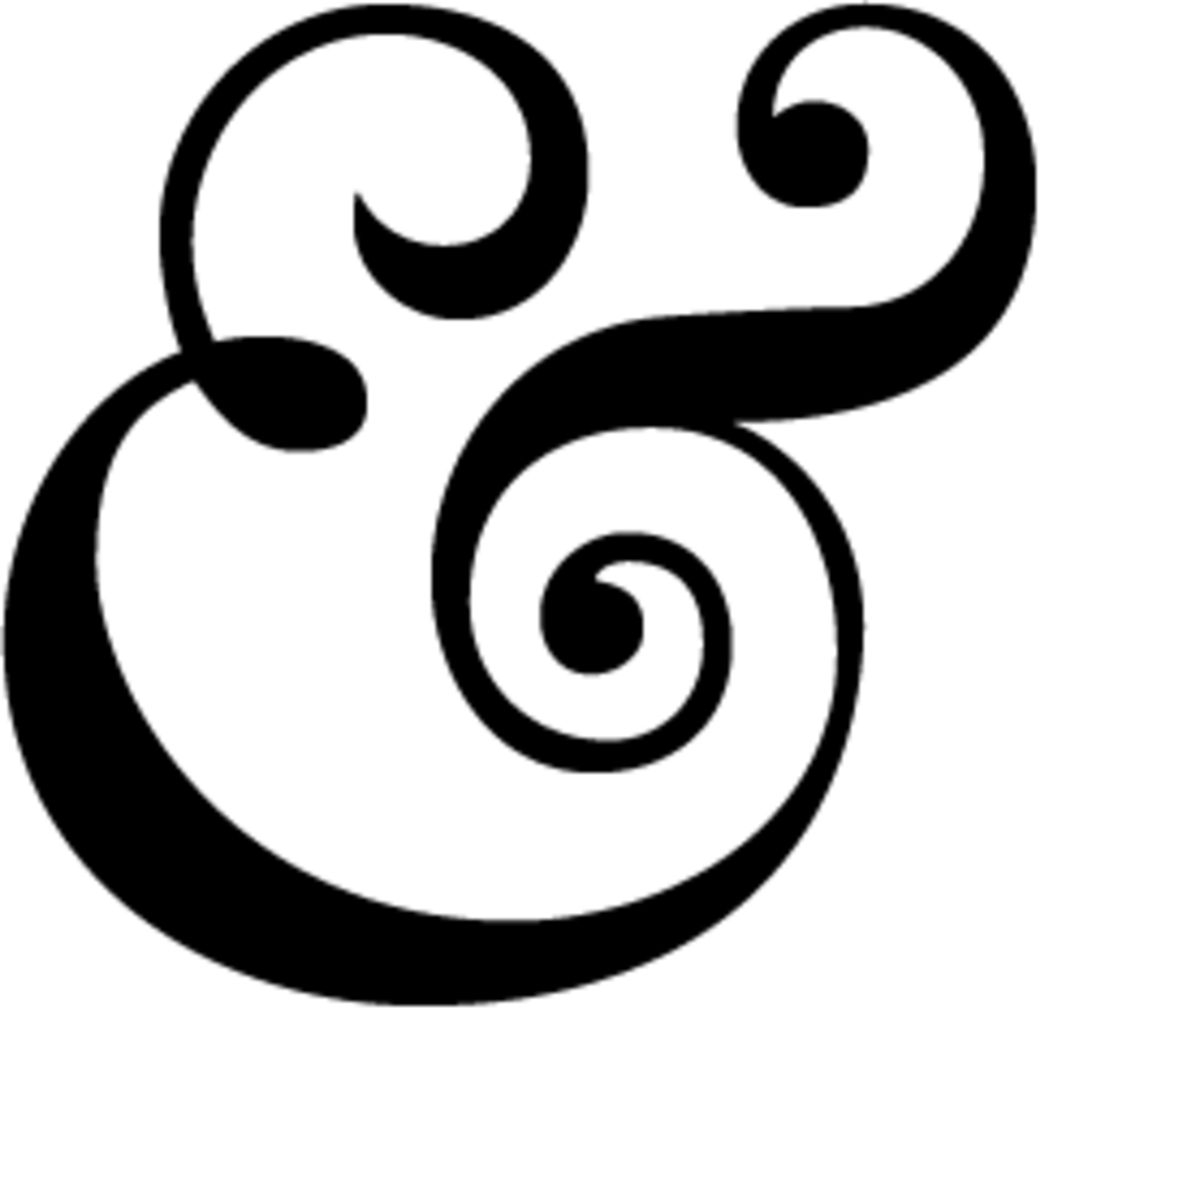 My, what a lovely ampersand you have!